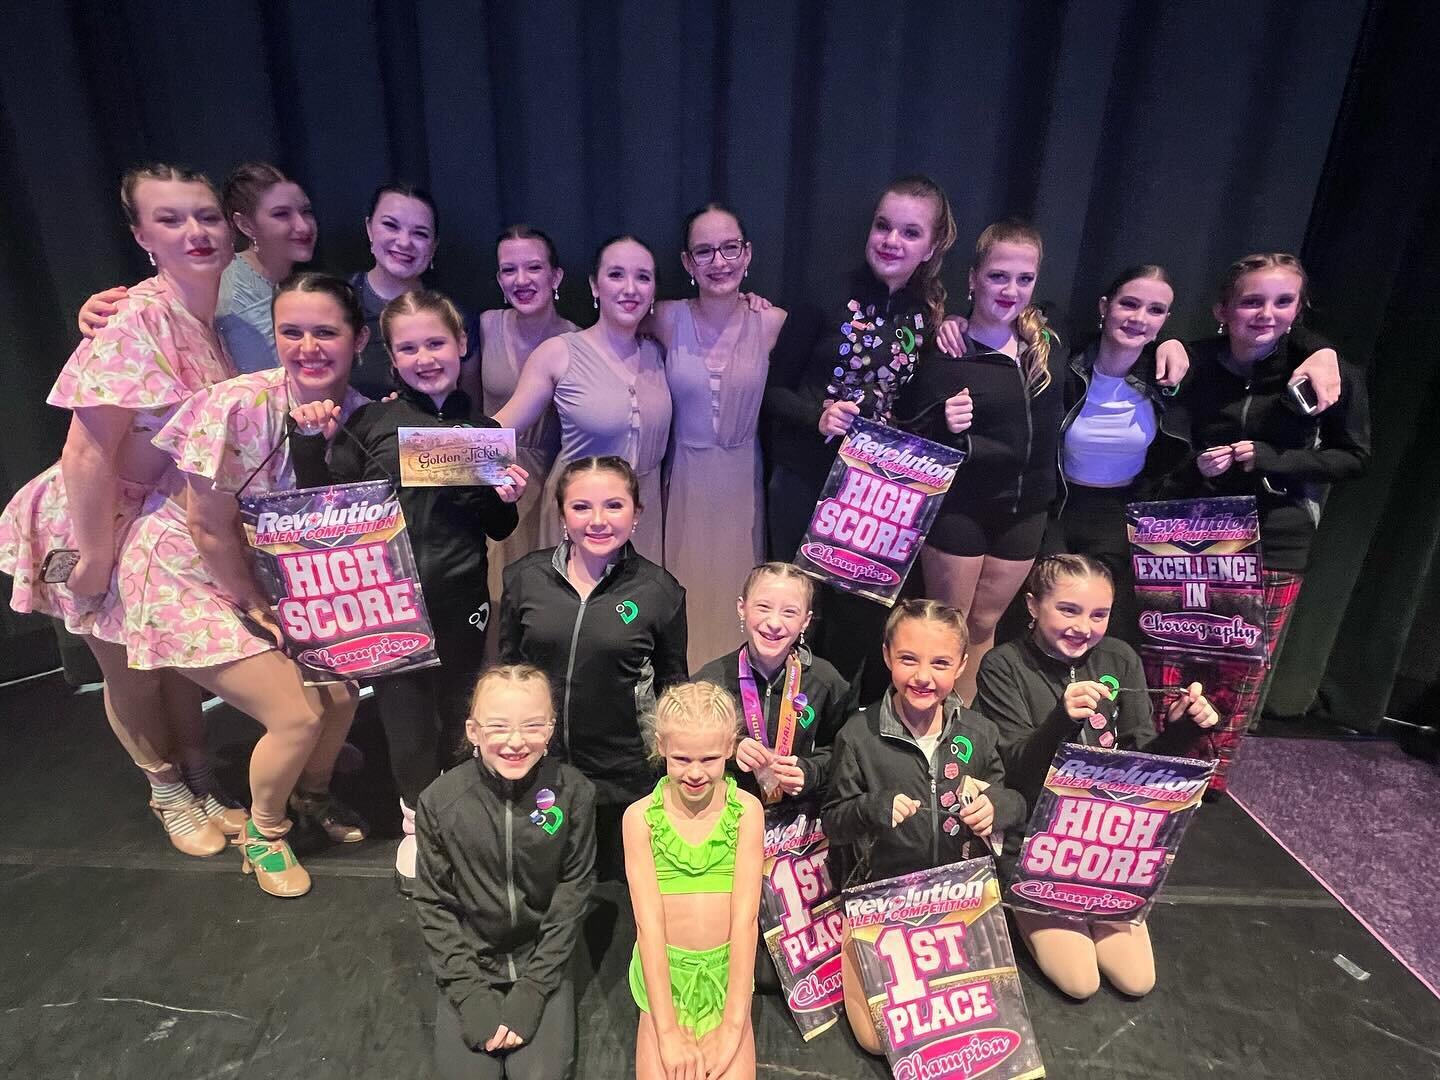 Awards #2 is done at @revotalent! Check out our results below:
✨Ladies Night: elite gold, 4th overall level 2 9-11 small group, choreography award, golden ticket 
✨ The Princesses Revolt: platinum, category 1st, 3rd overall level 1 9-11 small group 
